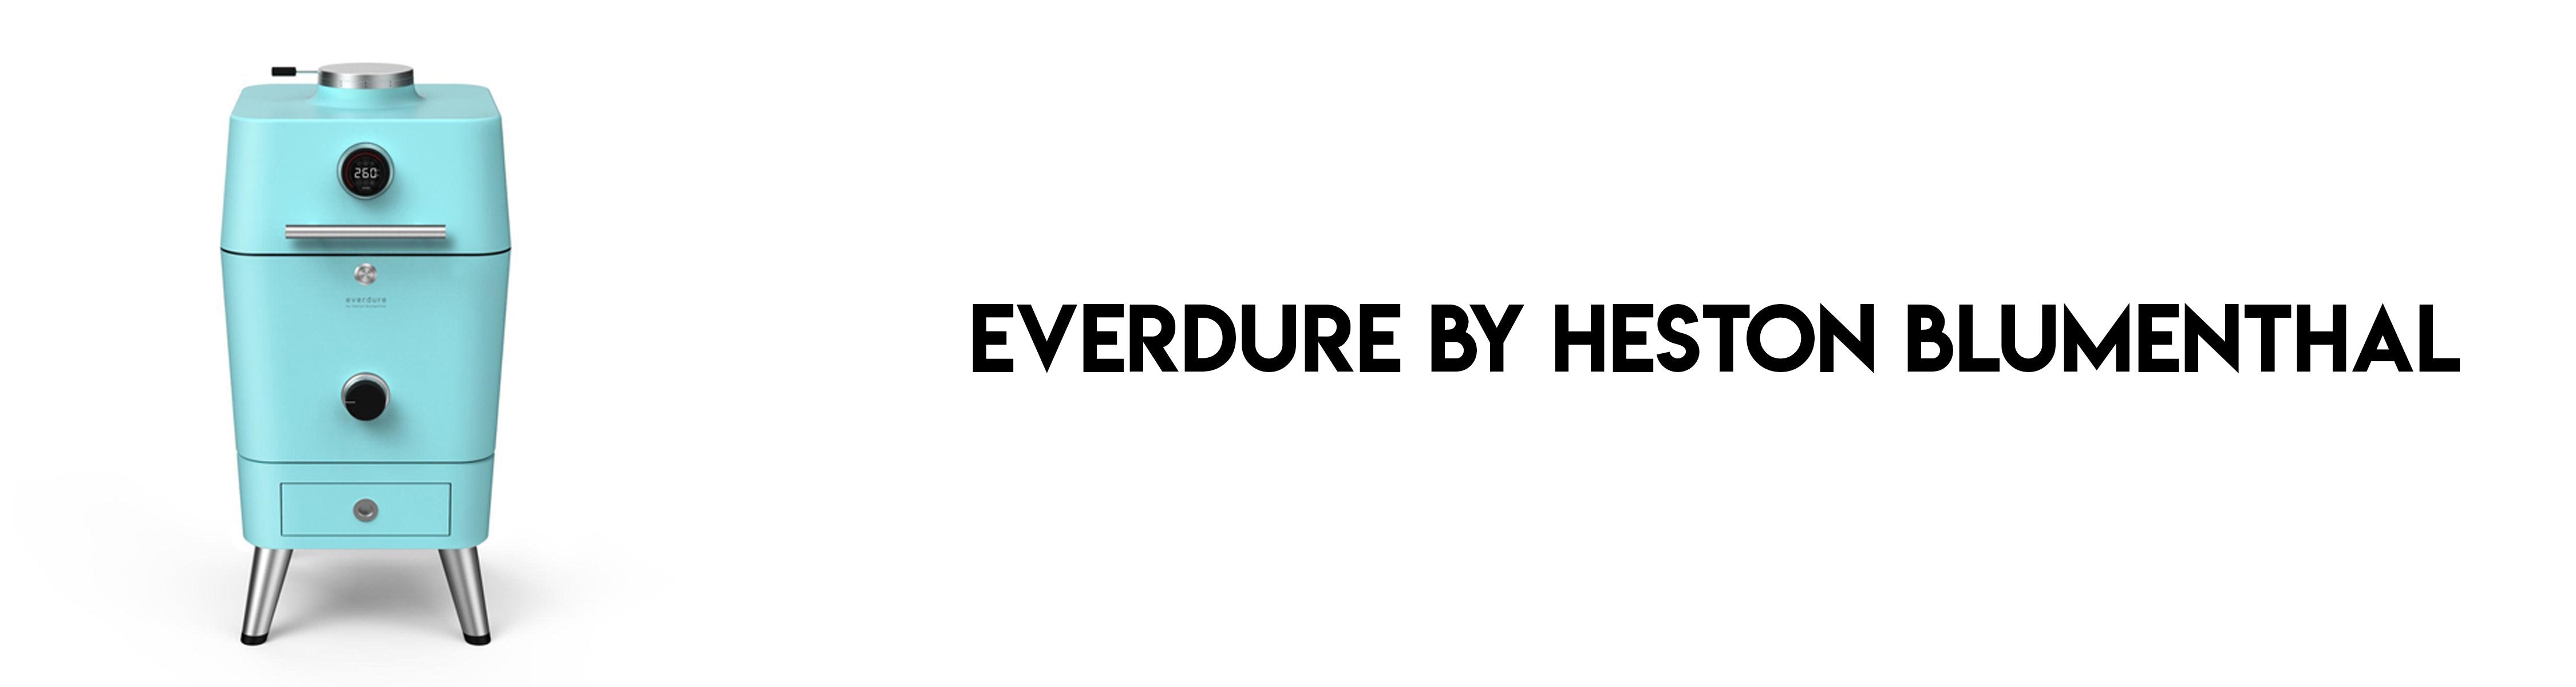 Everdure By Heston Blumenthal - Recreation Outfitters